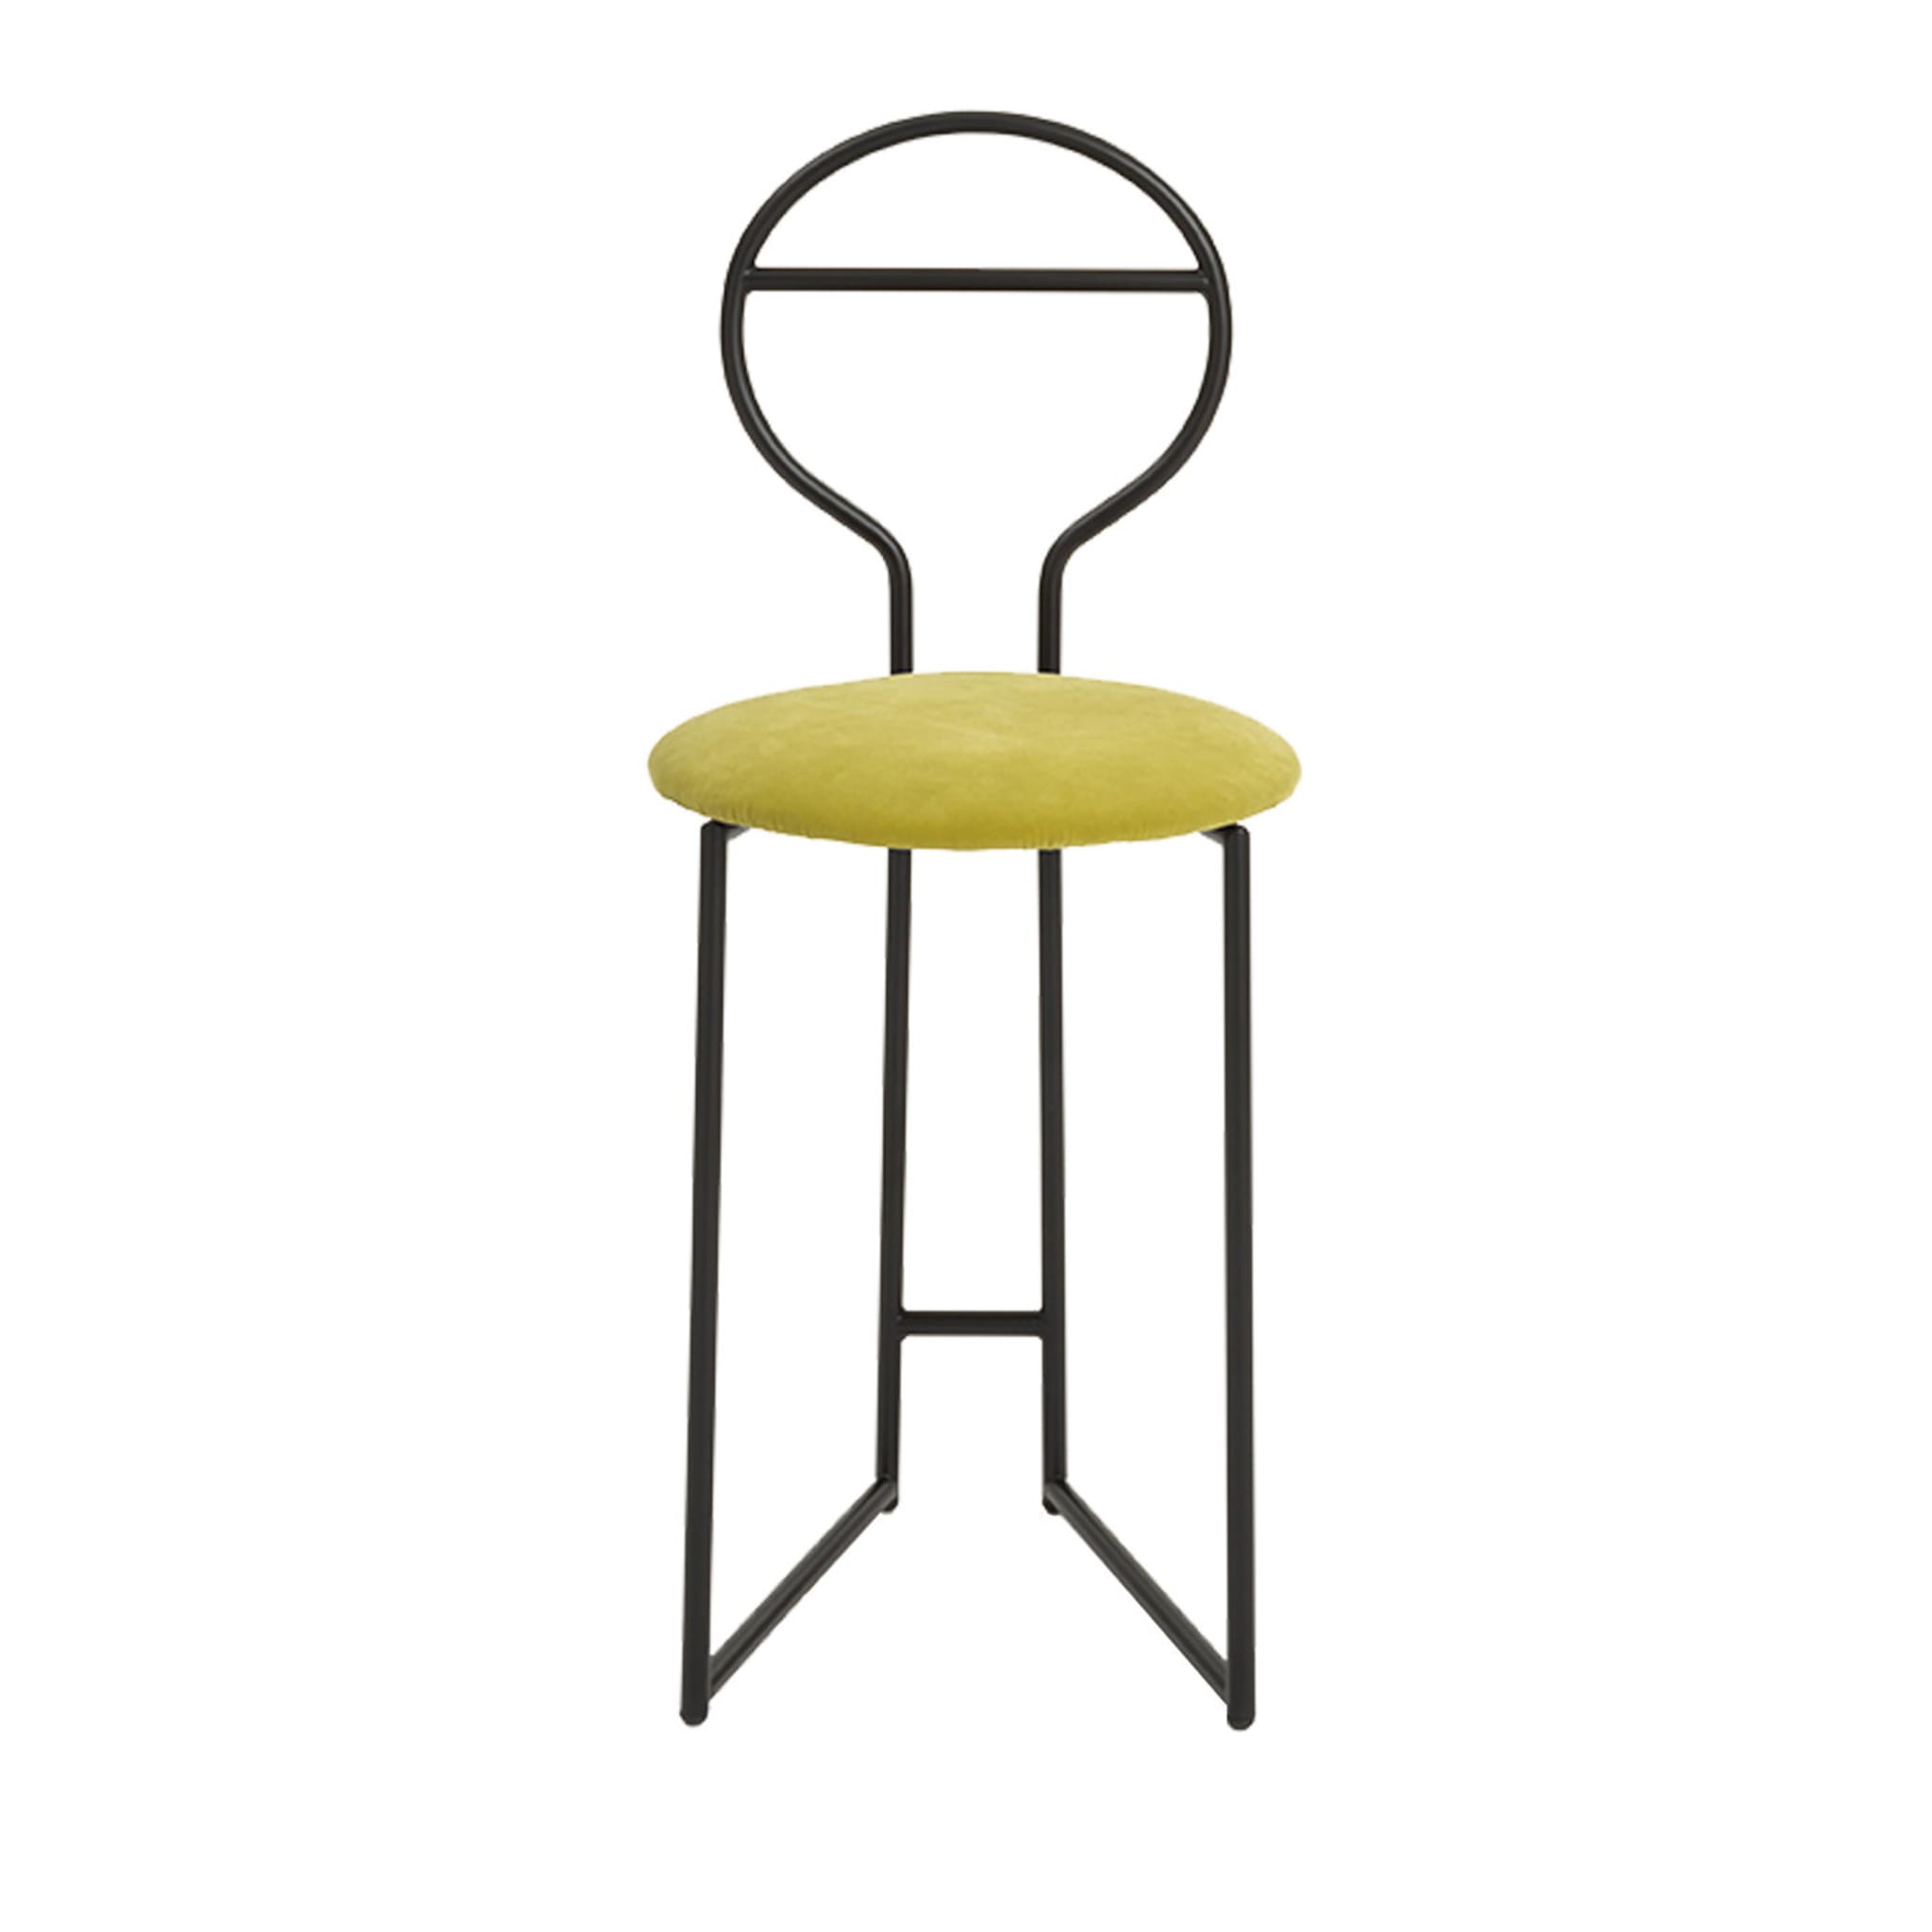 Yellow Joly Chairdrobe with Low Backrest by Lorenz + Kaz - Main view